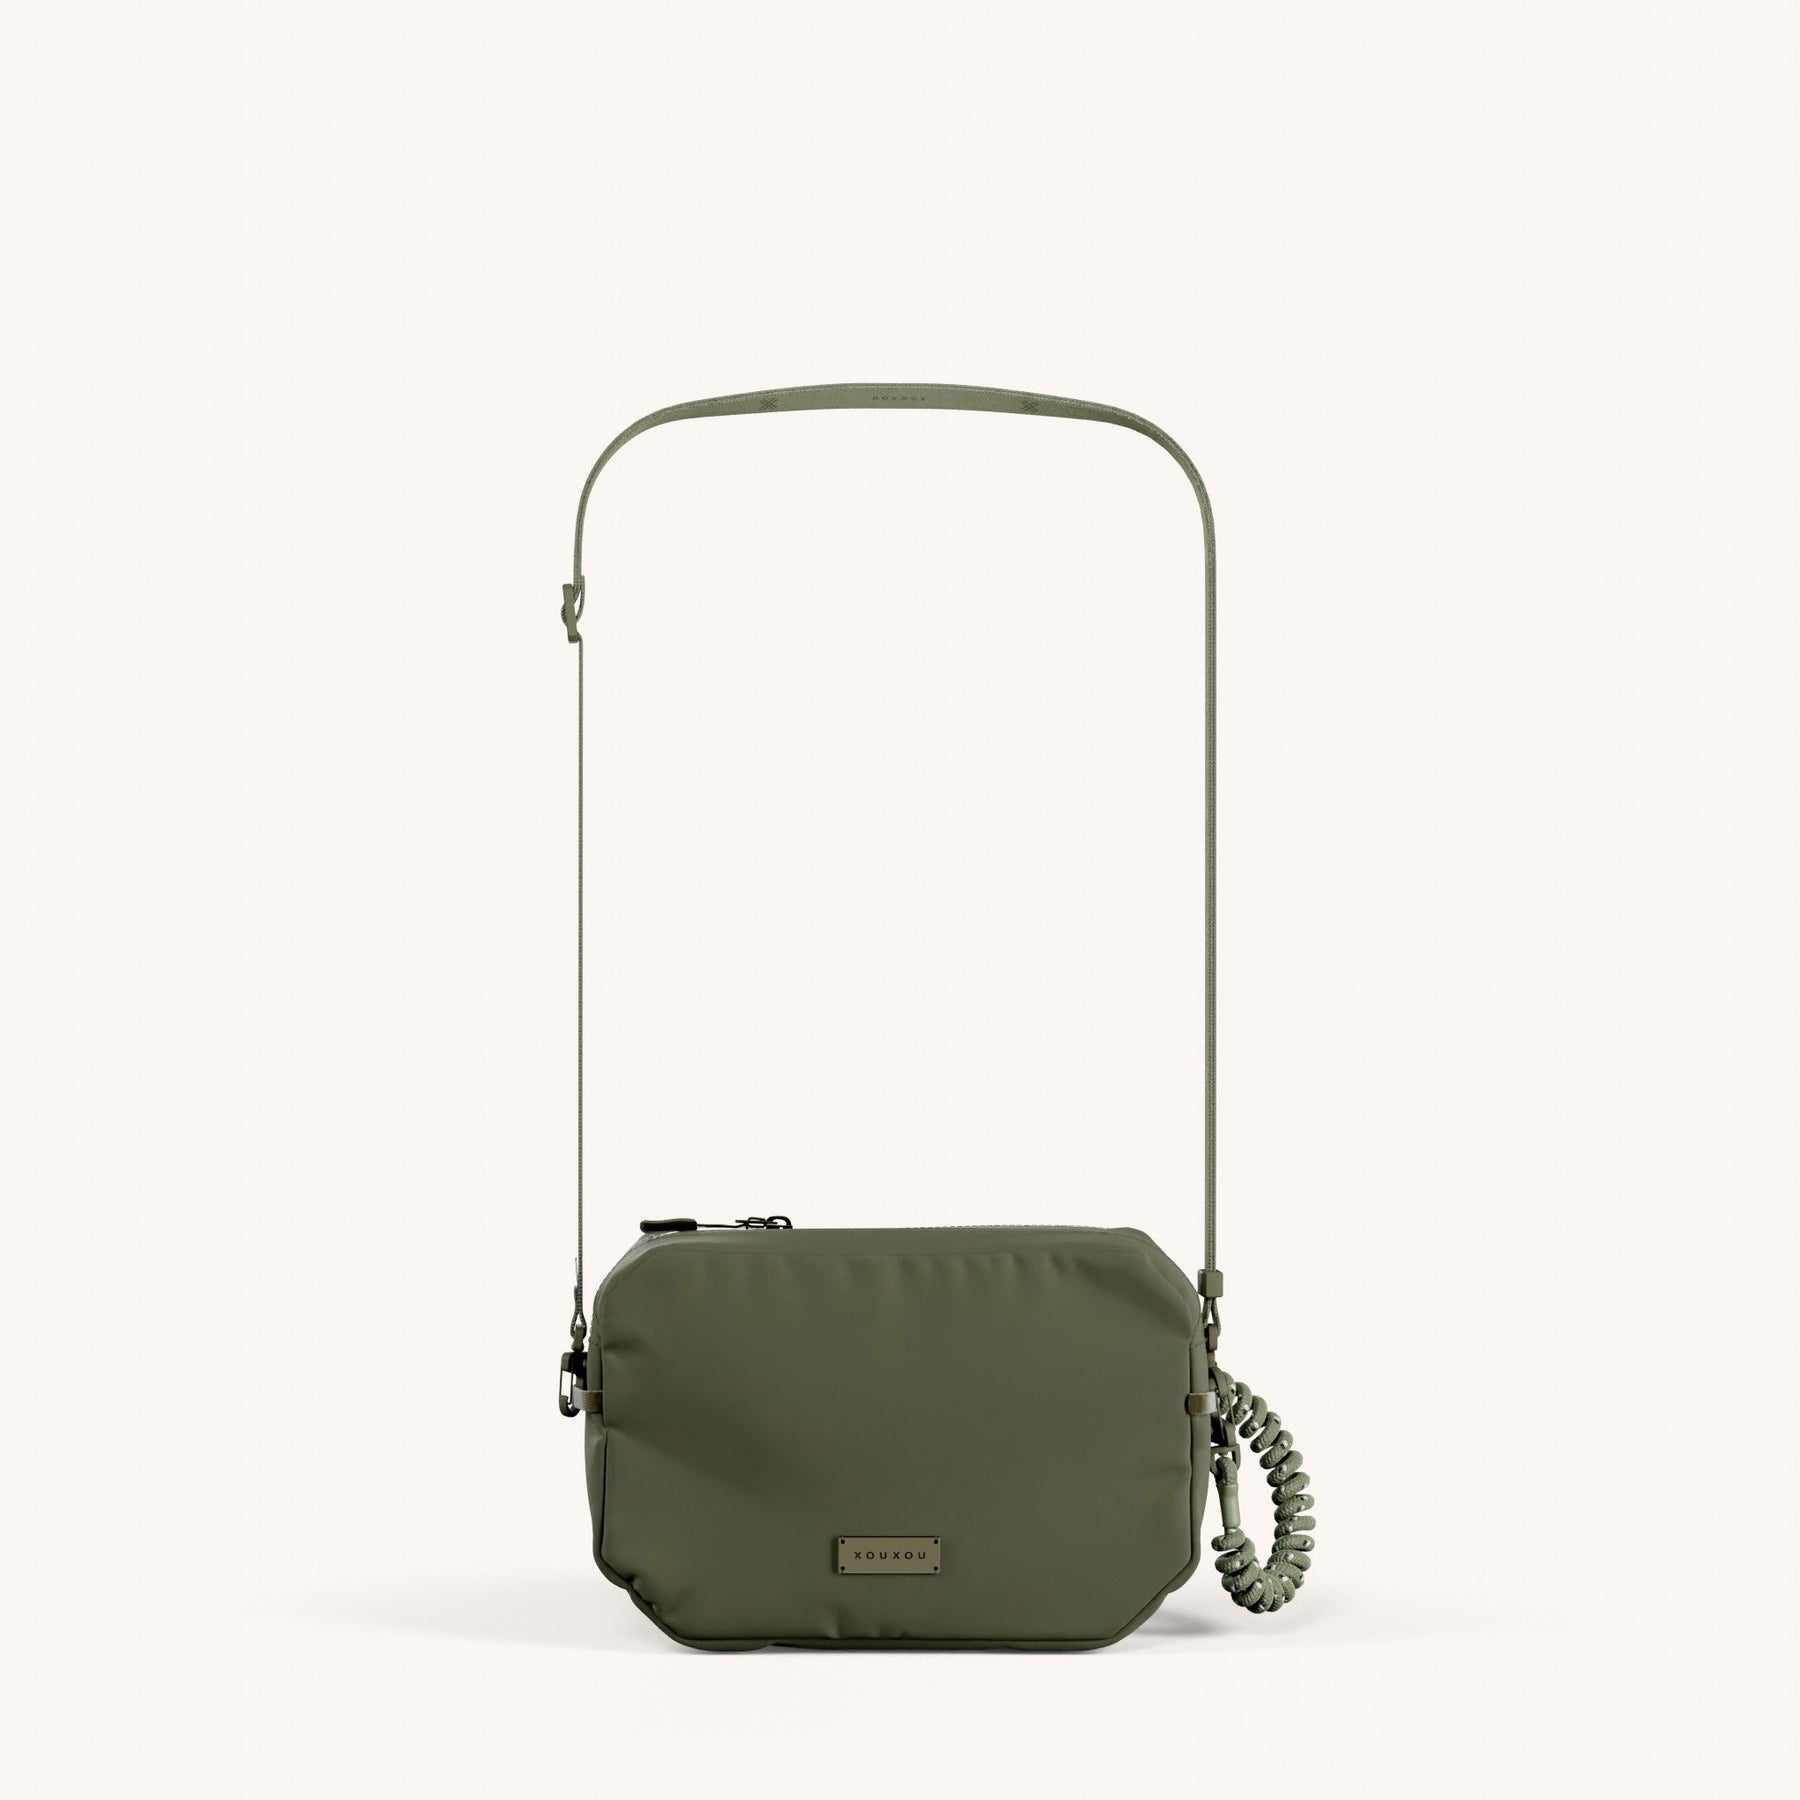 Crossbody Bag with Slim Lanyard in Moss Total View | XOUXOU